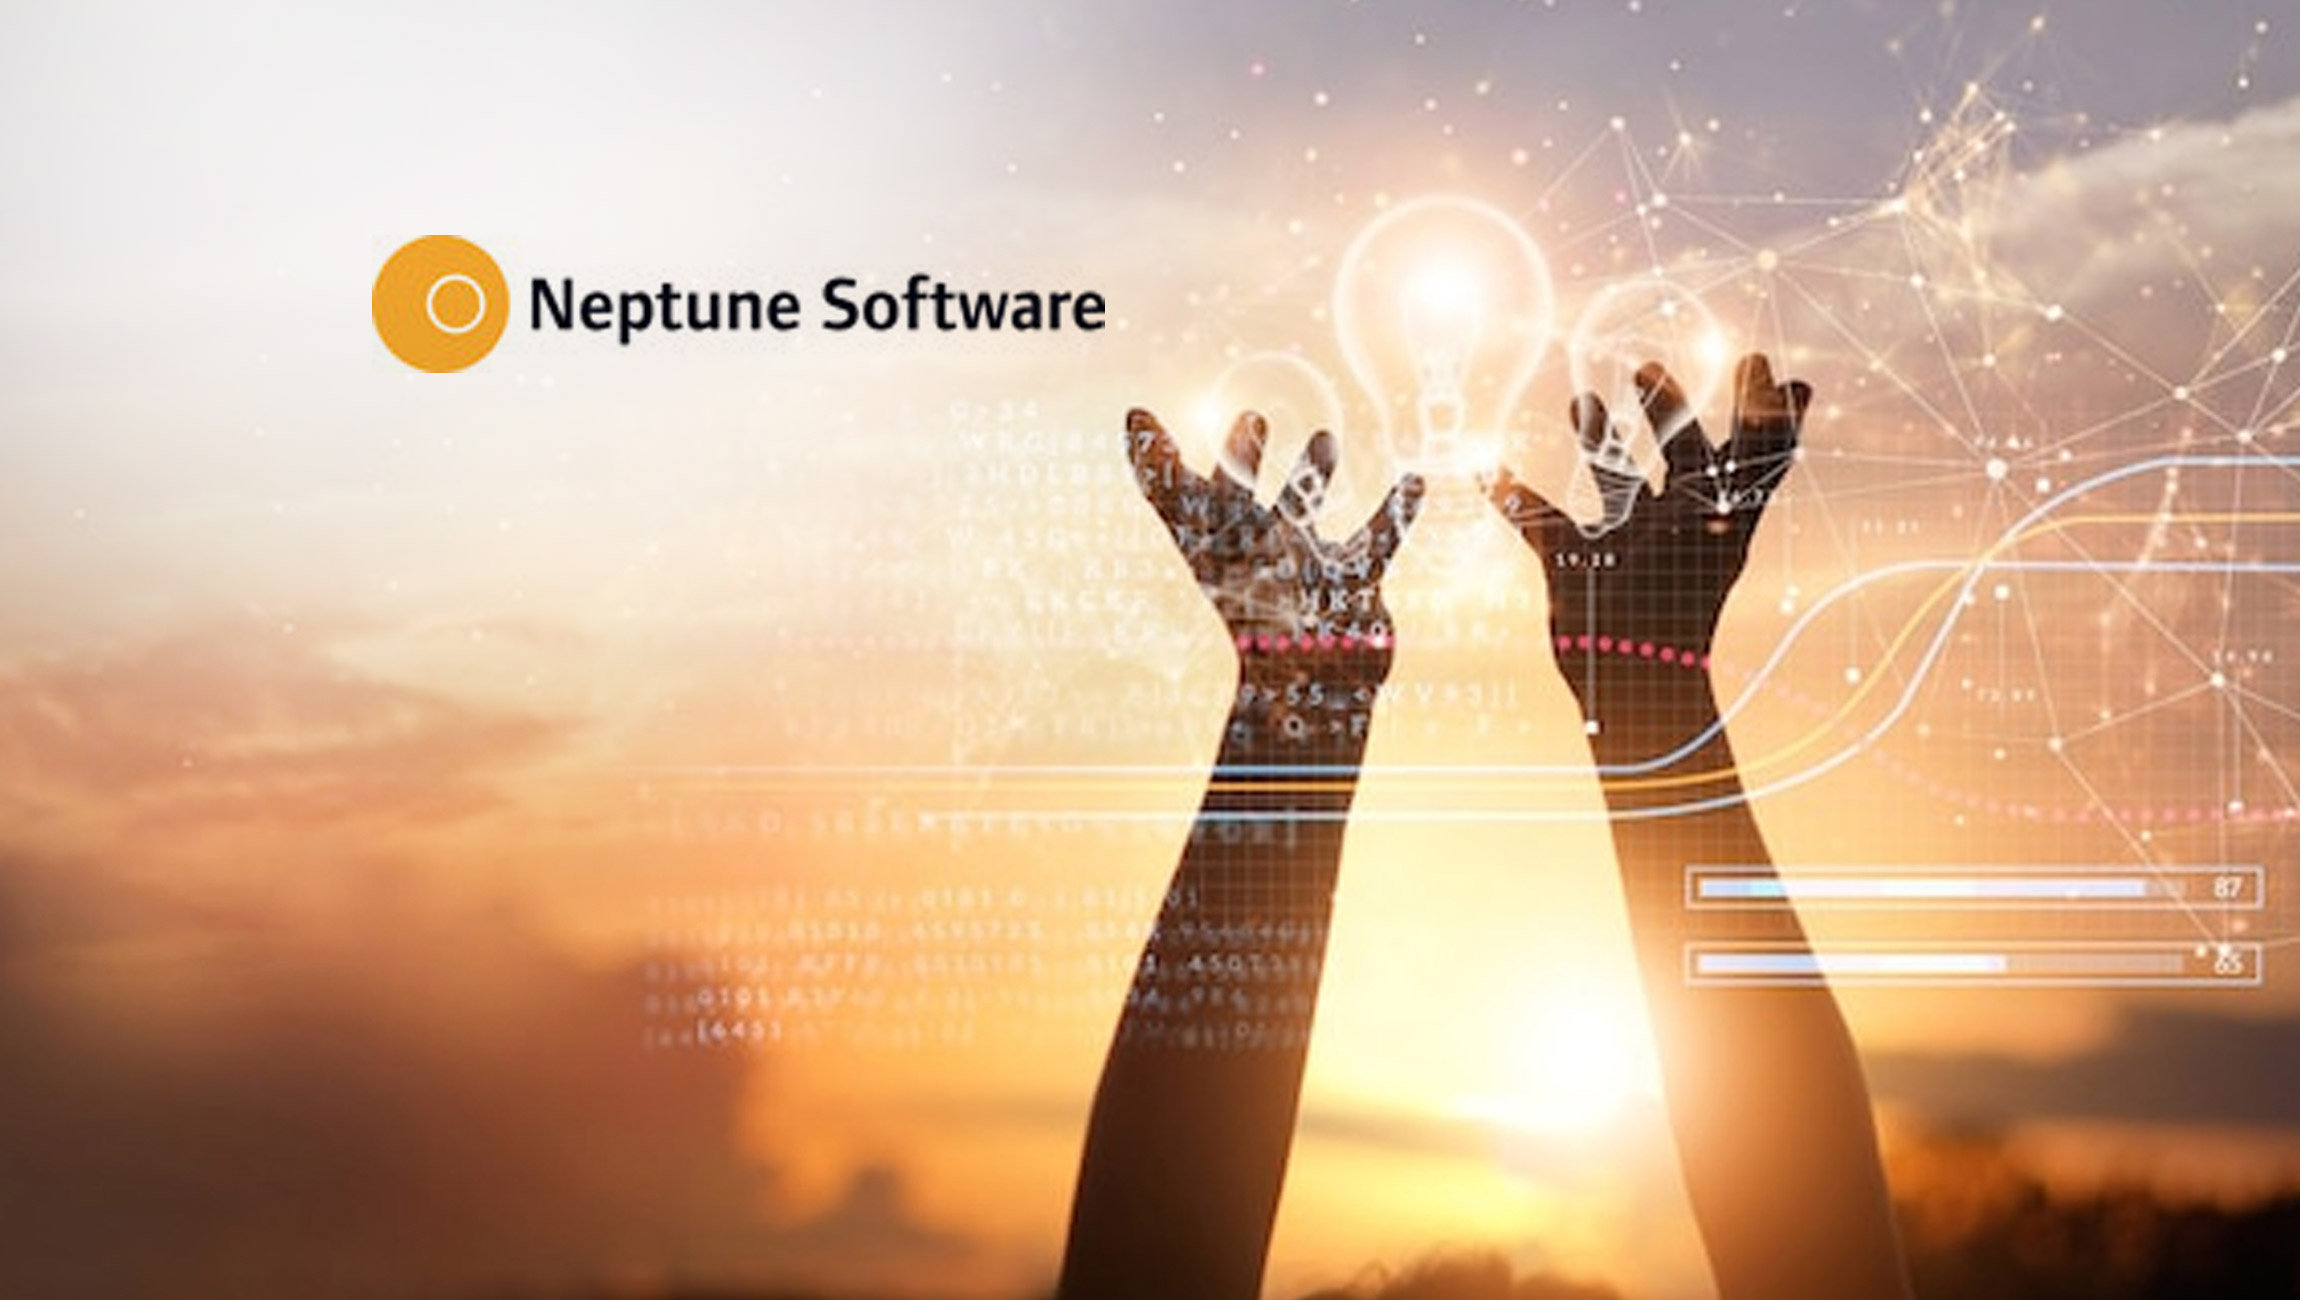 Neptune-Software--'User-Centered-Design-Thinking-is-Key-to-Innovation'